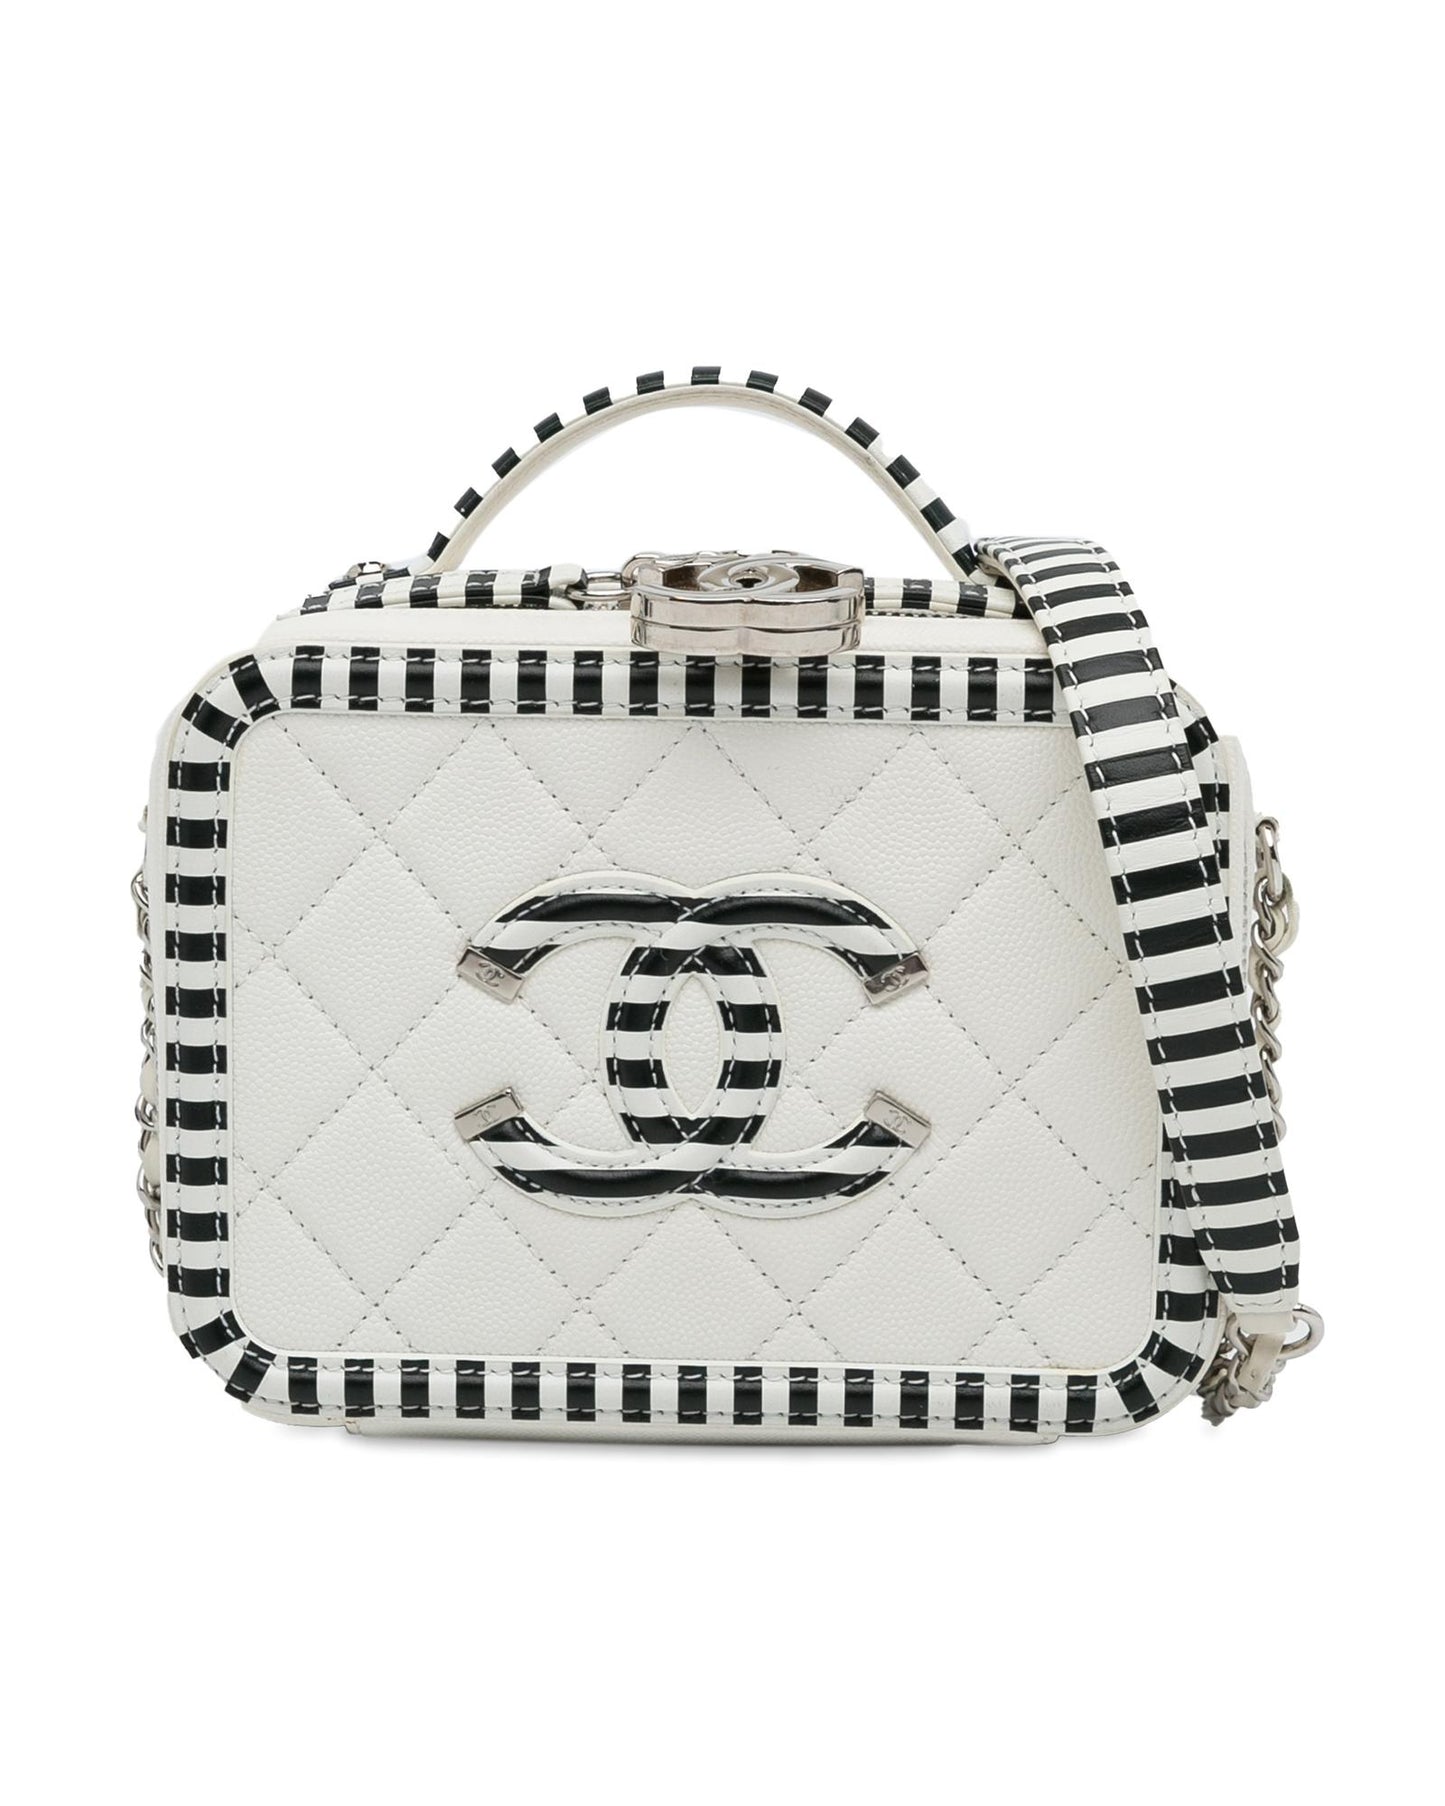 Chanel Women's Quilted Leather Vanity Bag with Woven Chain Strap in White